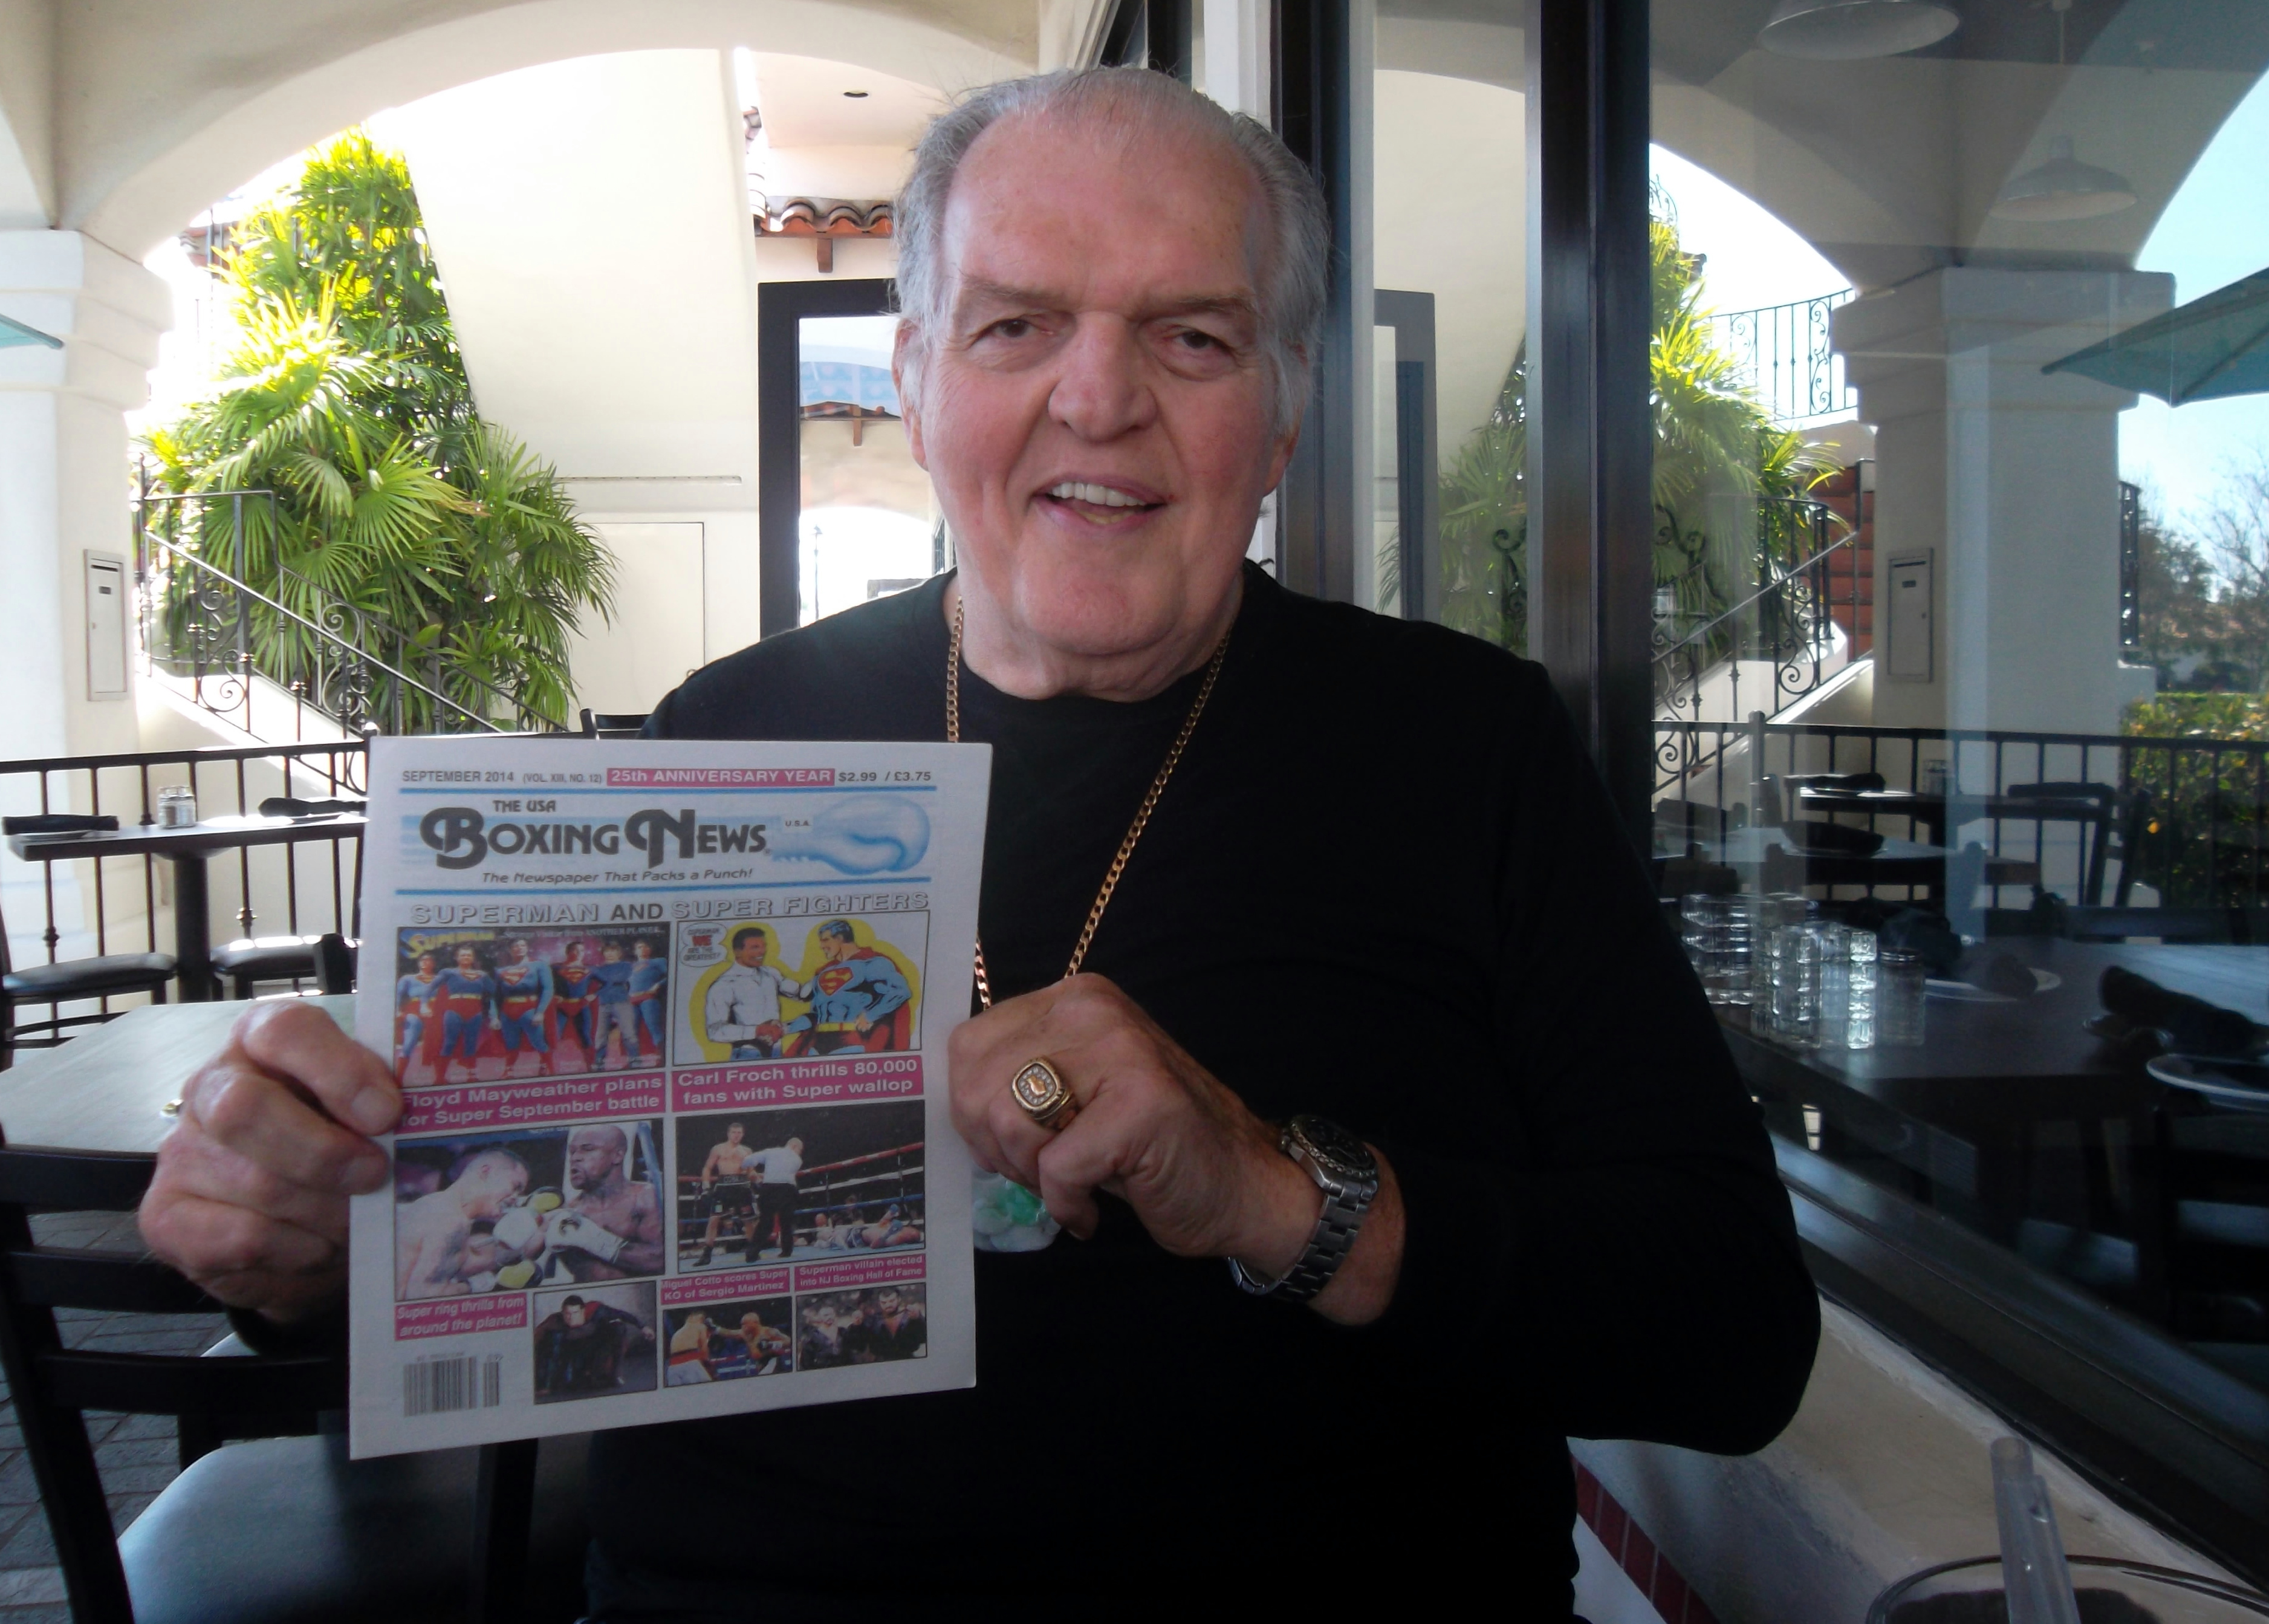 Former heavyweight contender and Superman movie star Jack O'Halloran with the USA Boxing News